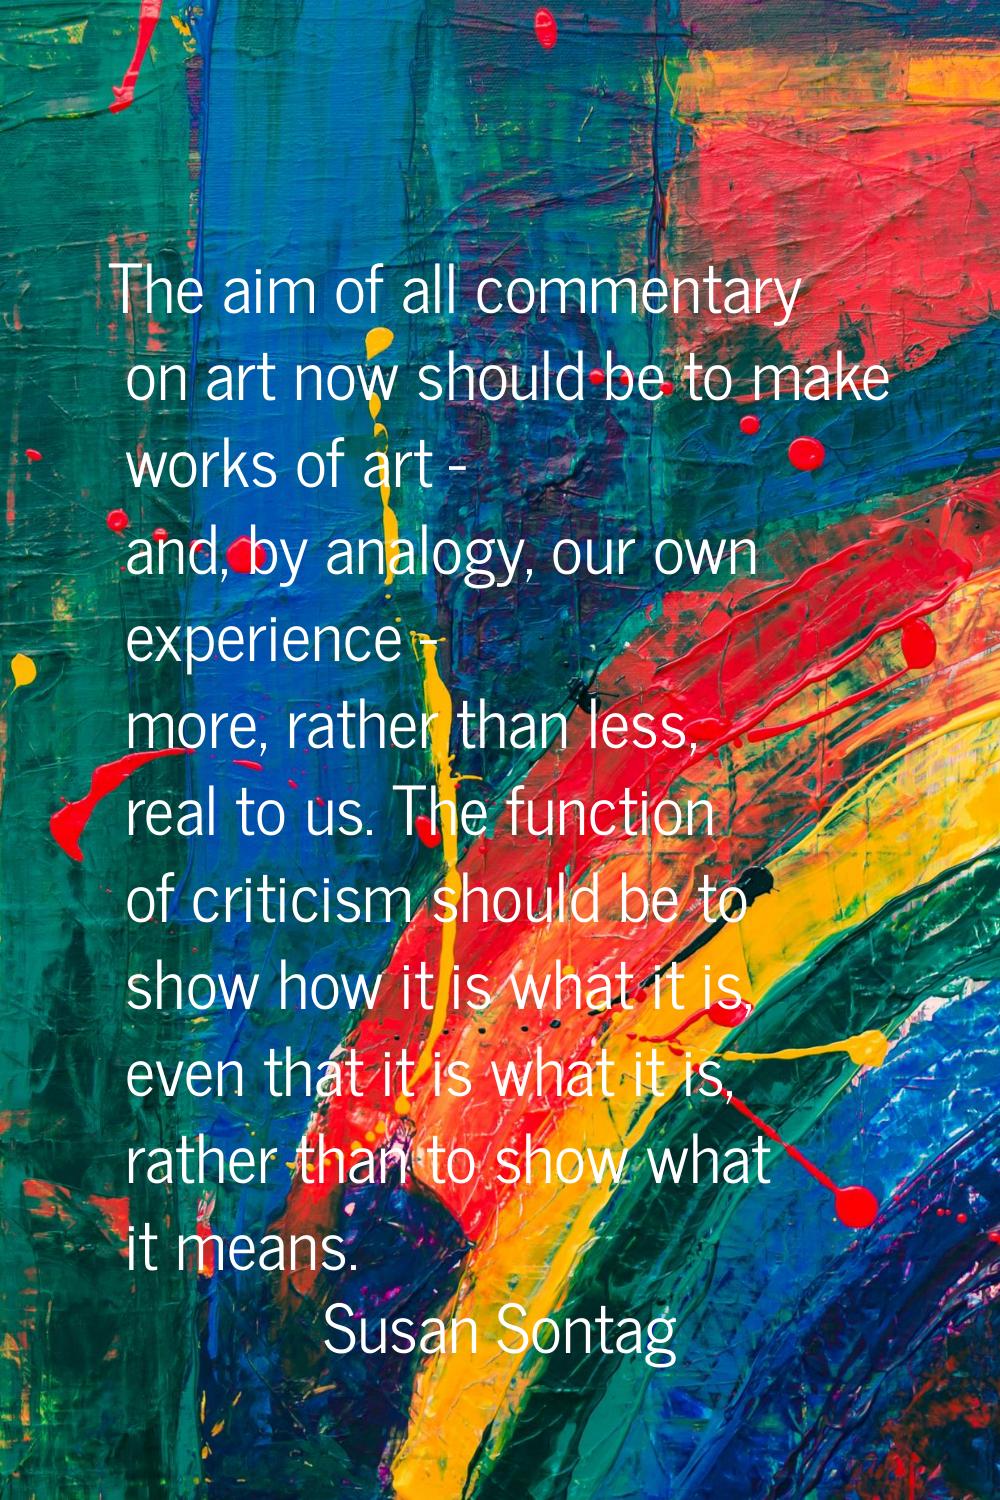 The aim of all commentary on art now should be to make works of art - and, by analogy, our own expe